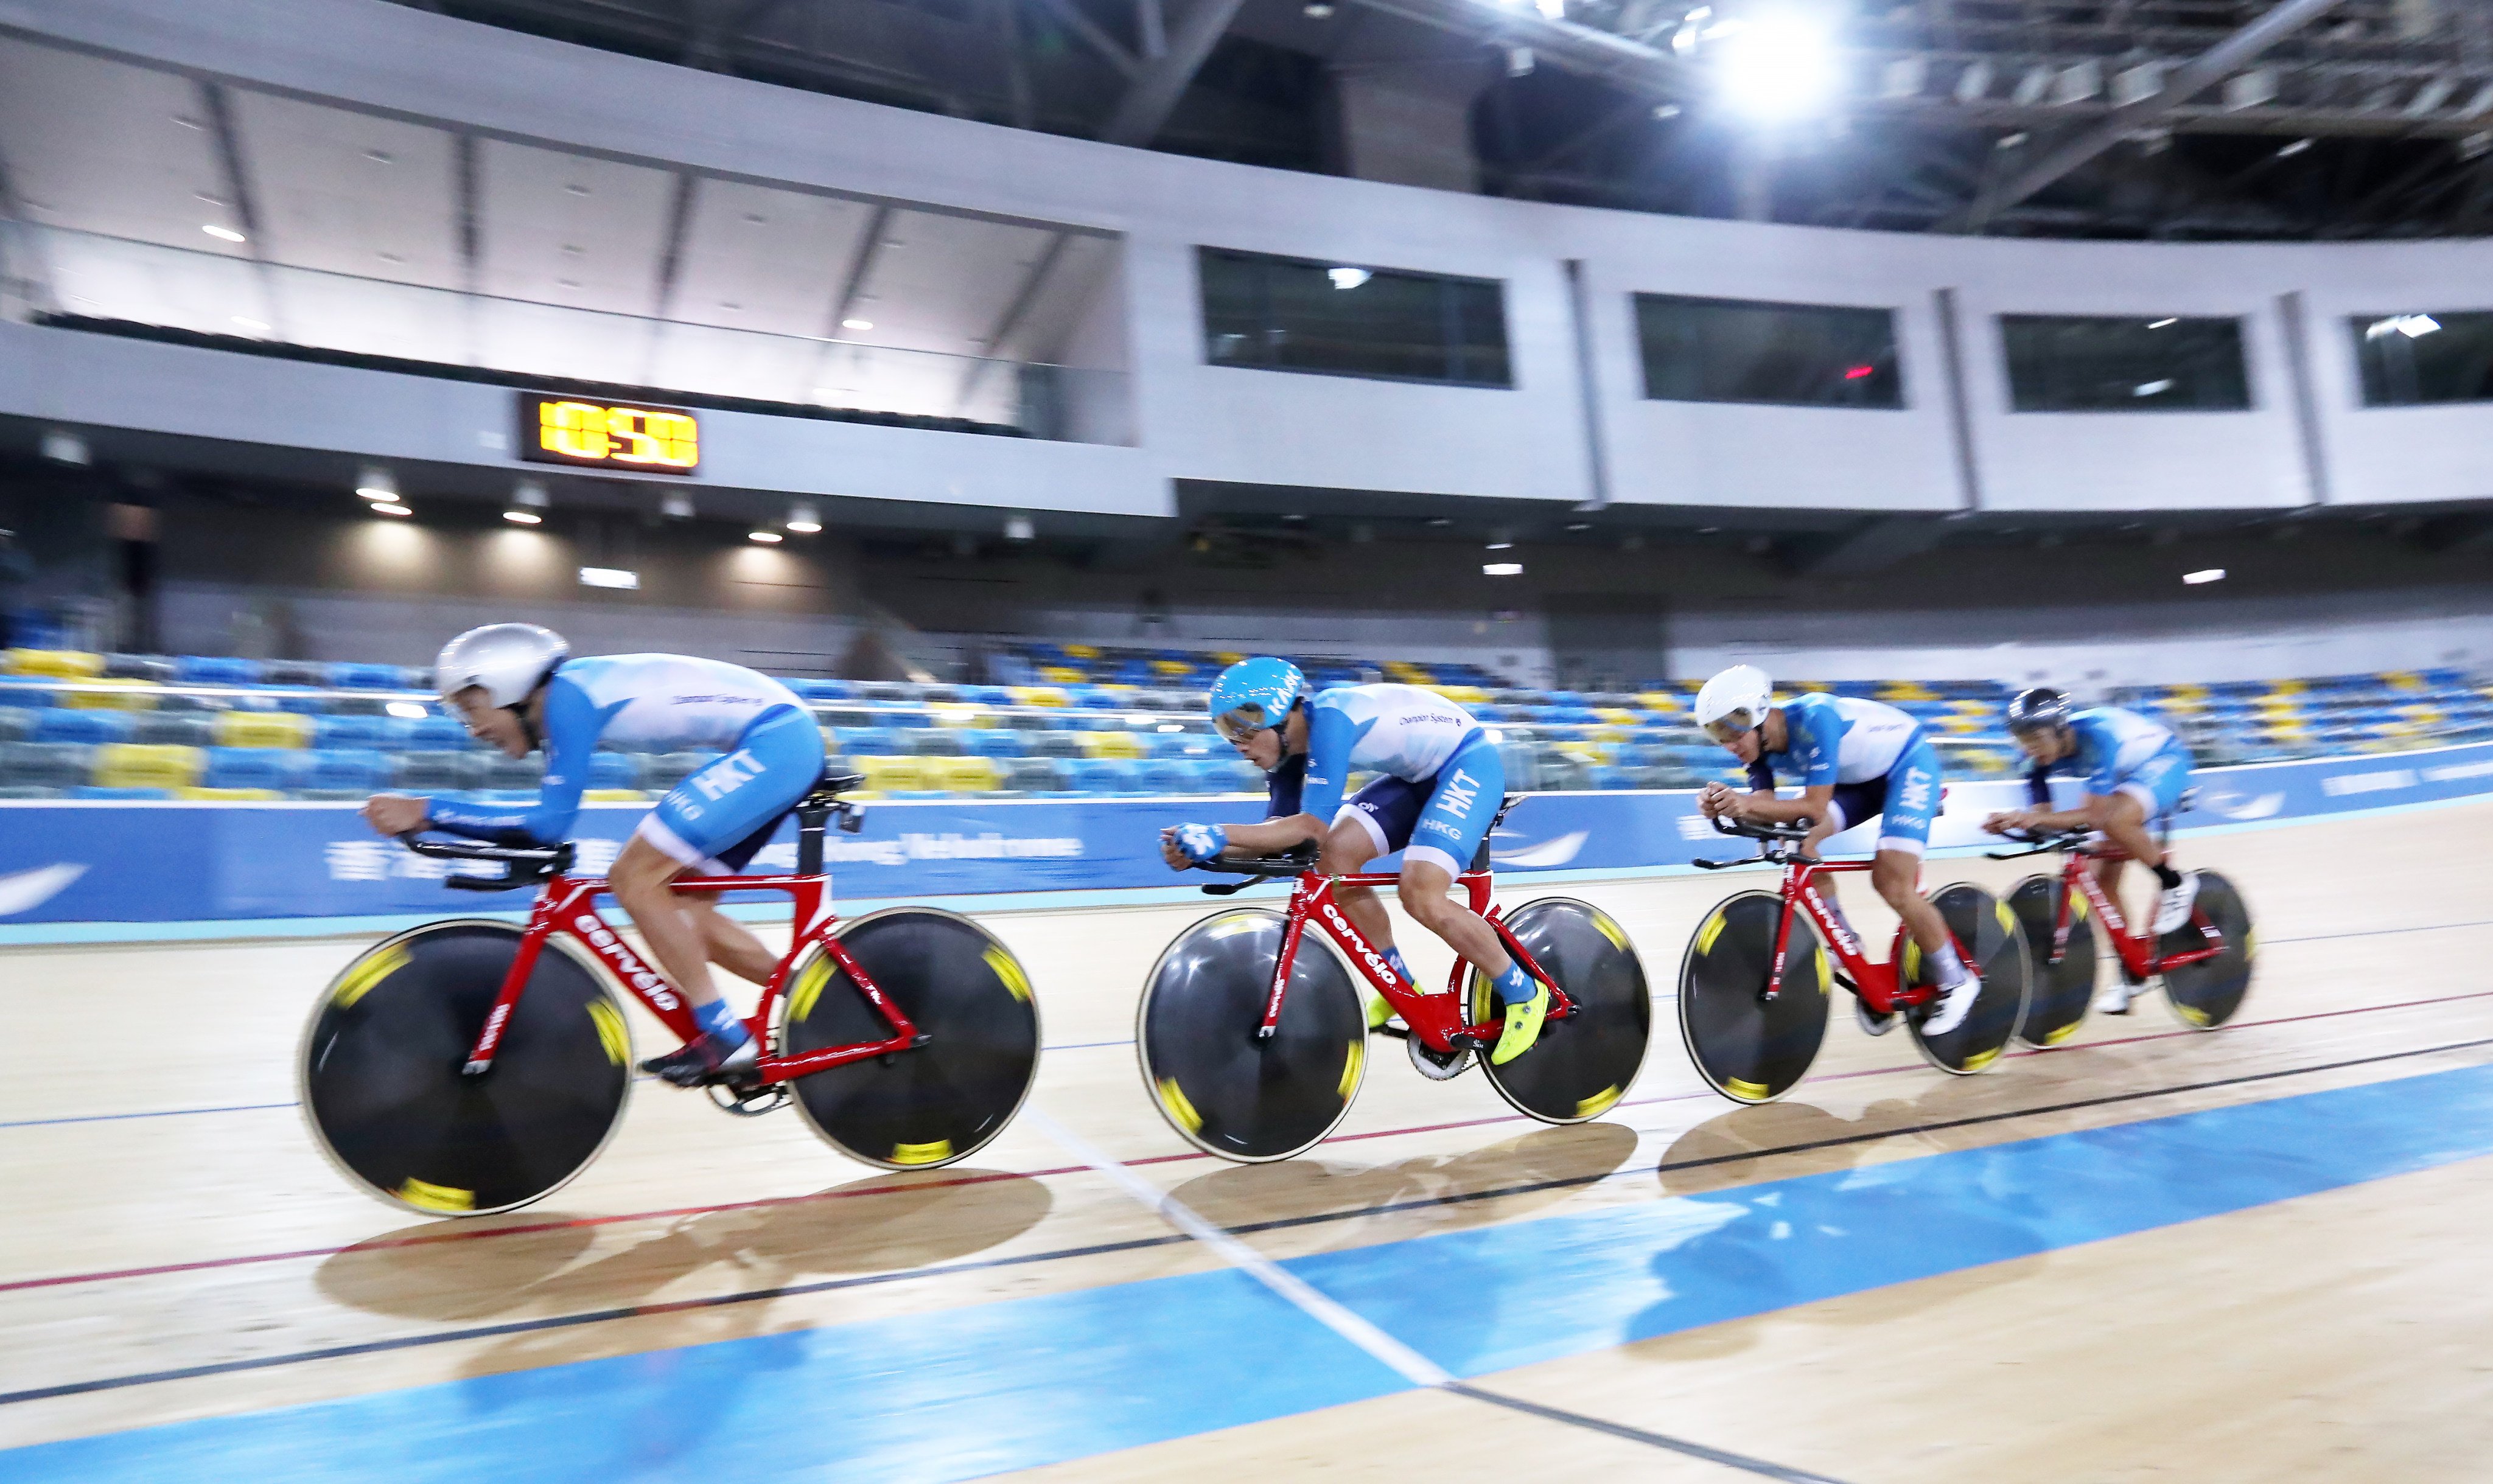 Leung Chun-wing (third from left) and his Hong Kong pursuit teammates could threaten their own national record with the backing of the home crowd. Photo: Nora Tam